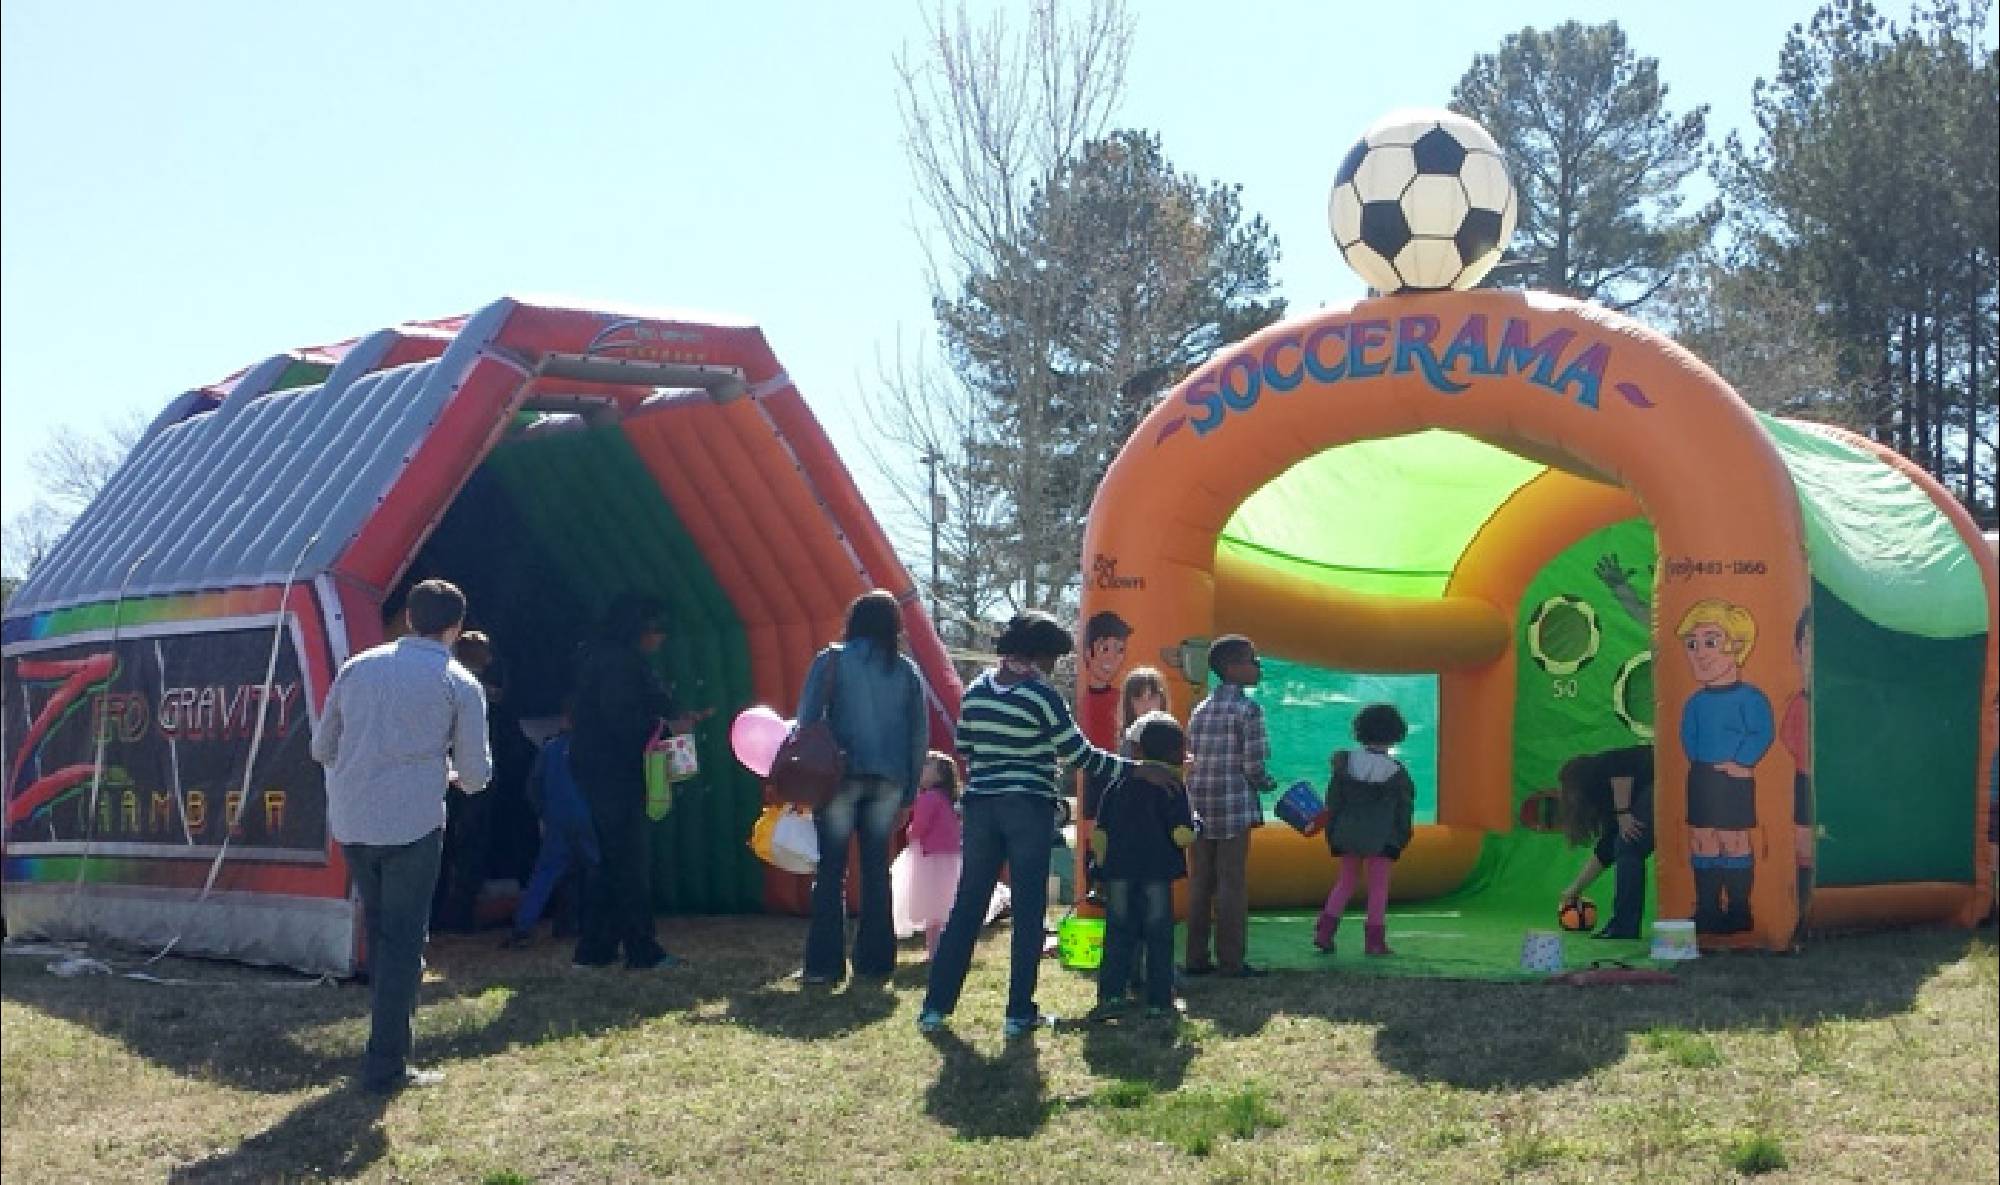 The inflatable toss and soccer rental games at a Durham event